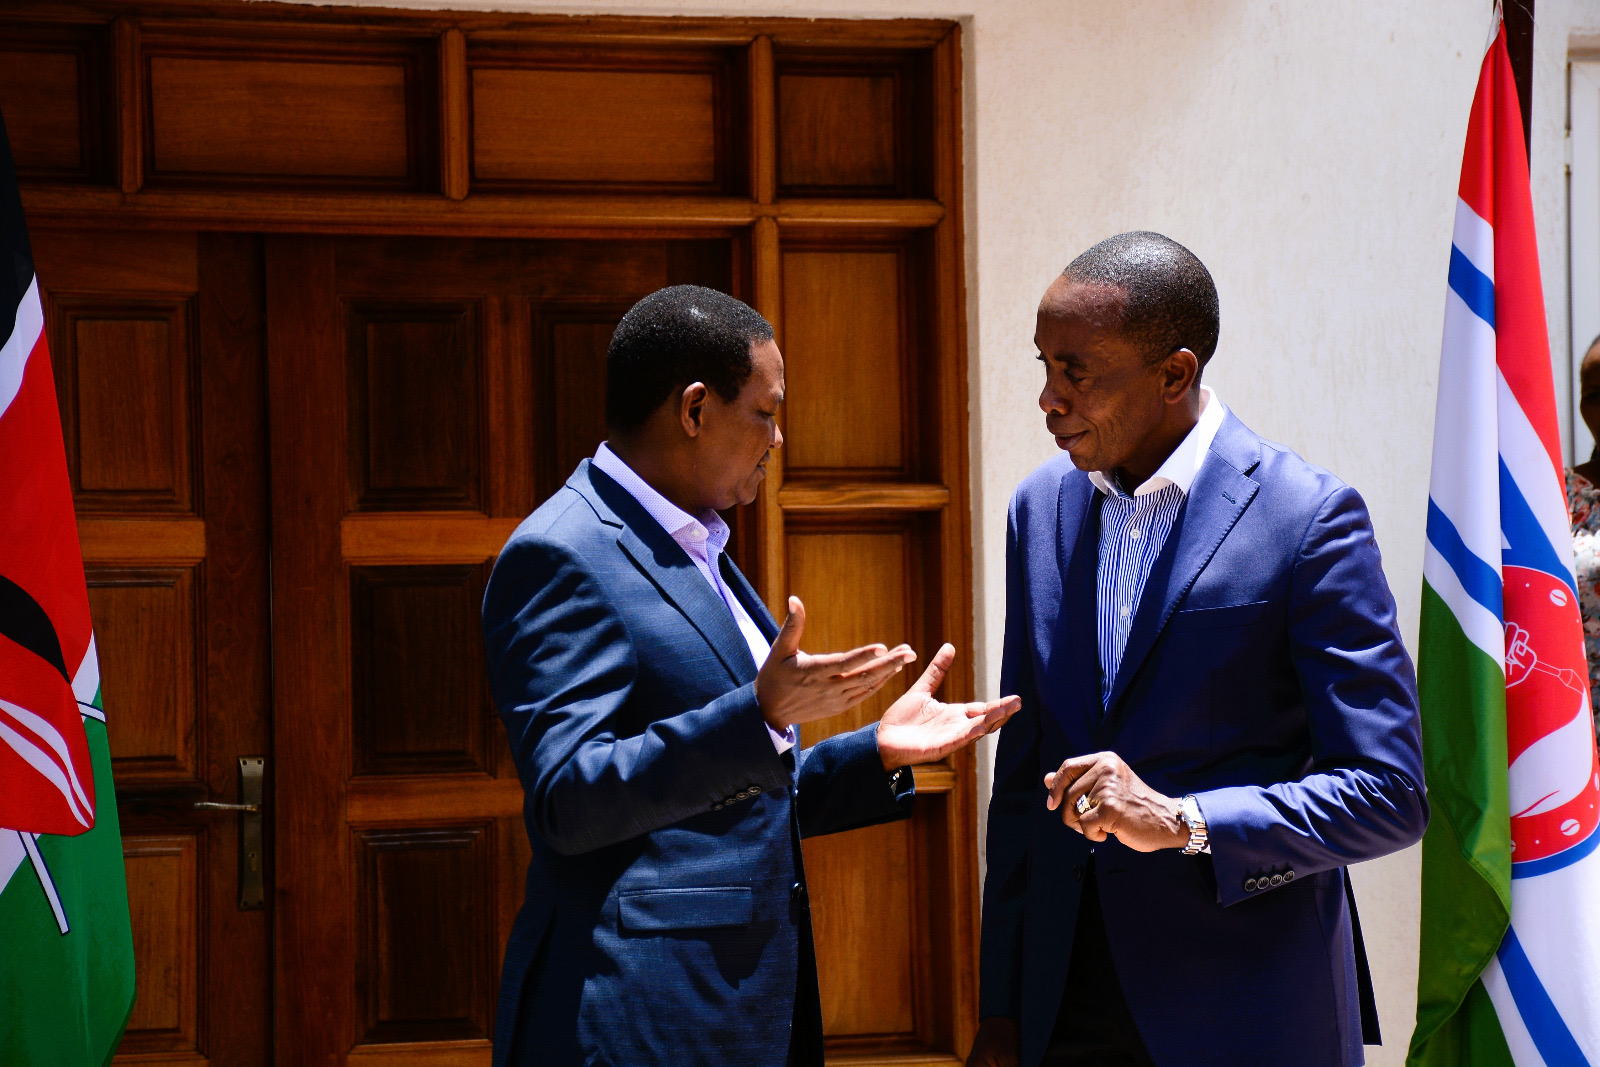 The Cabinet Secretary, Ministry of Tourism and Wildlife, Dr. Alfred Mutua (left), having a conversation with the Kiambu County Governor, H.E. Dr. Paul Wamatangi (right).